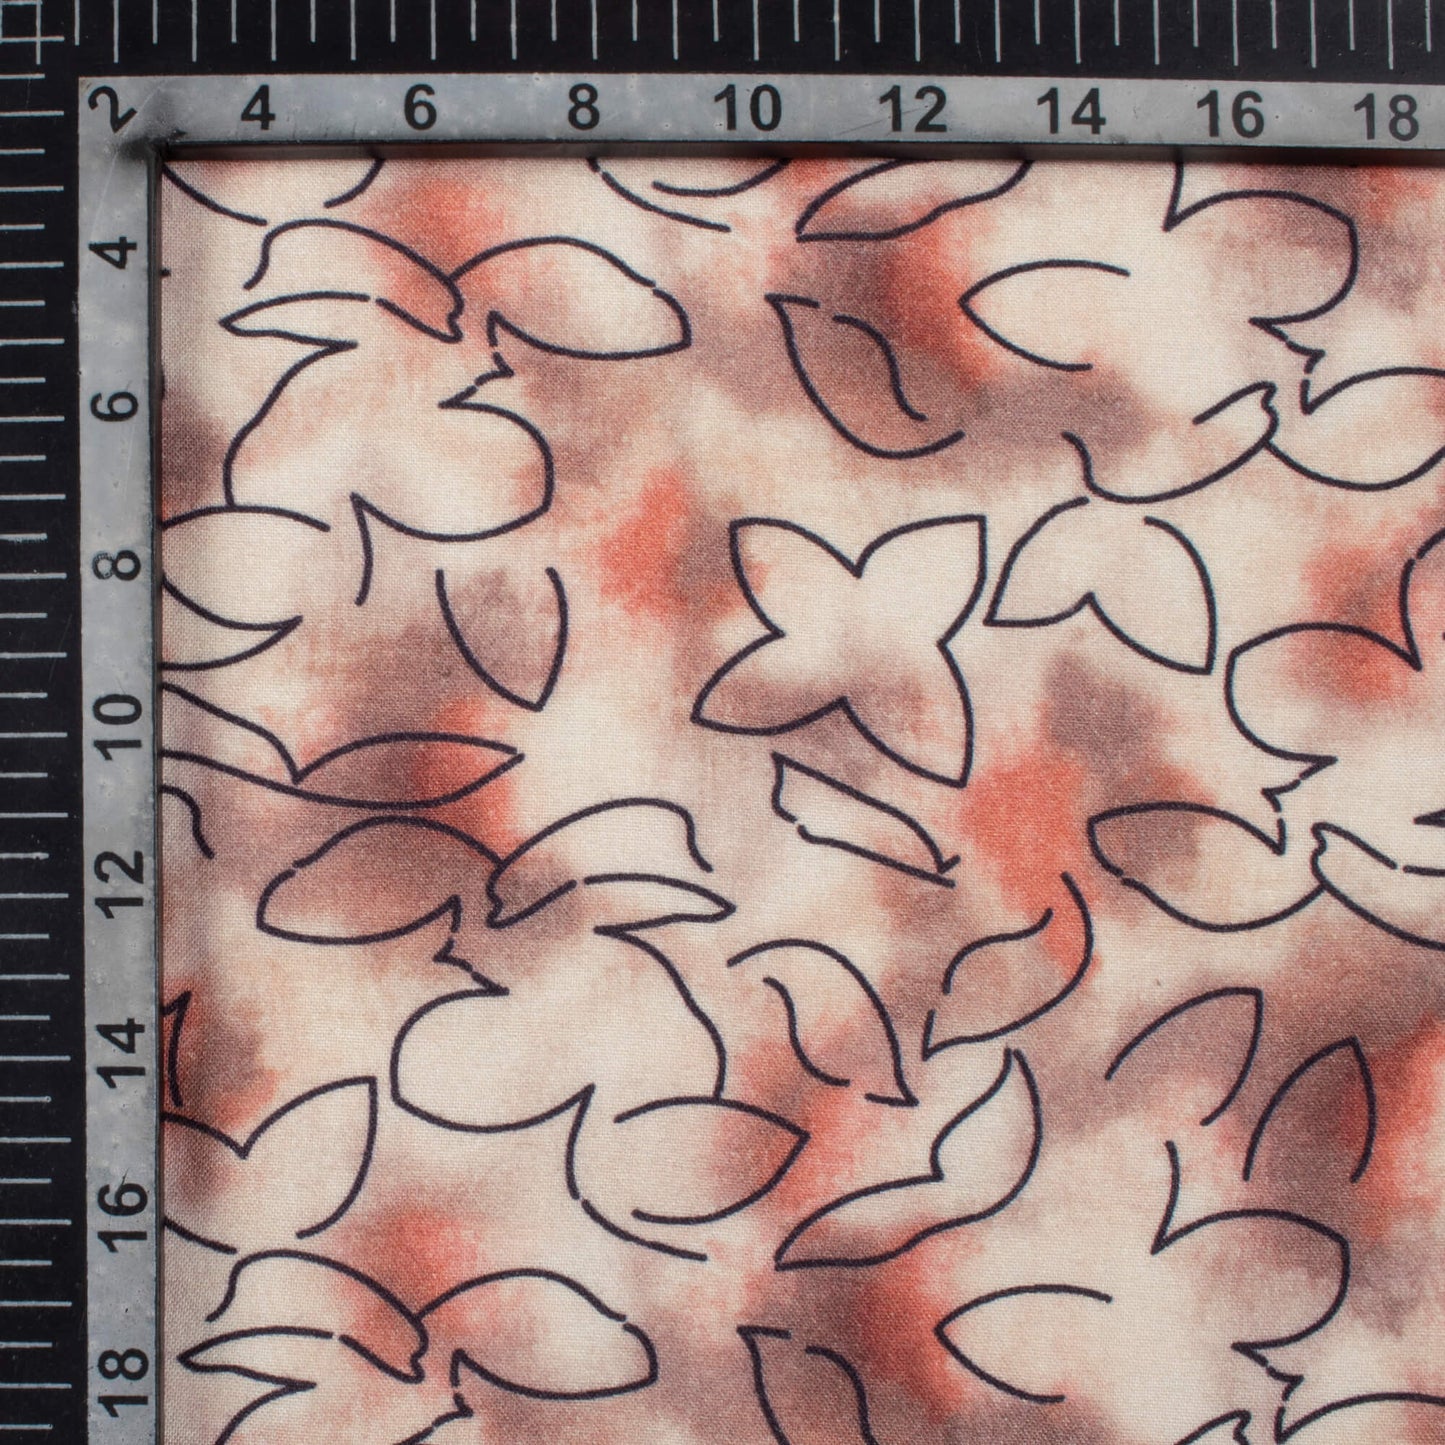 Off White And Brown Abstract Pattern Digital Print Viscose Rayon Fabric (Width 58 Inches)